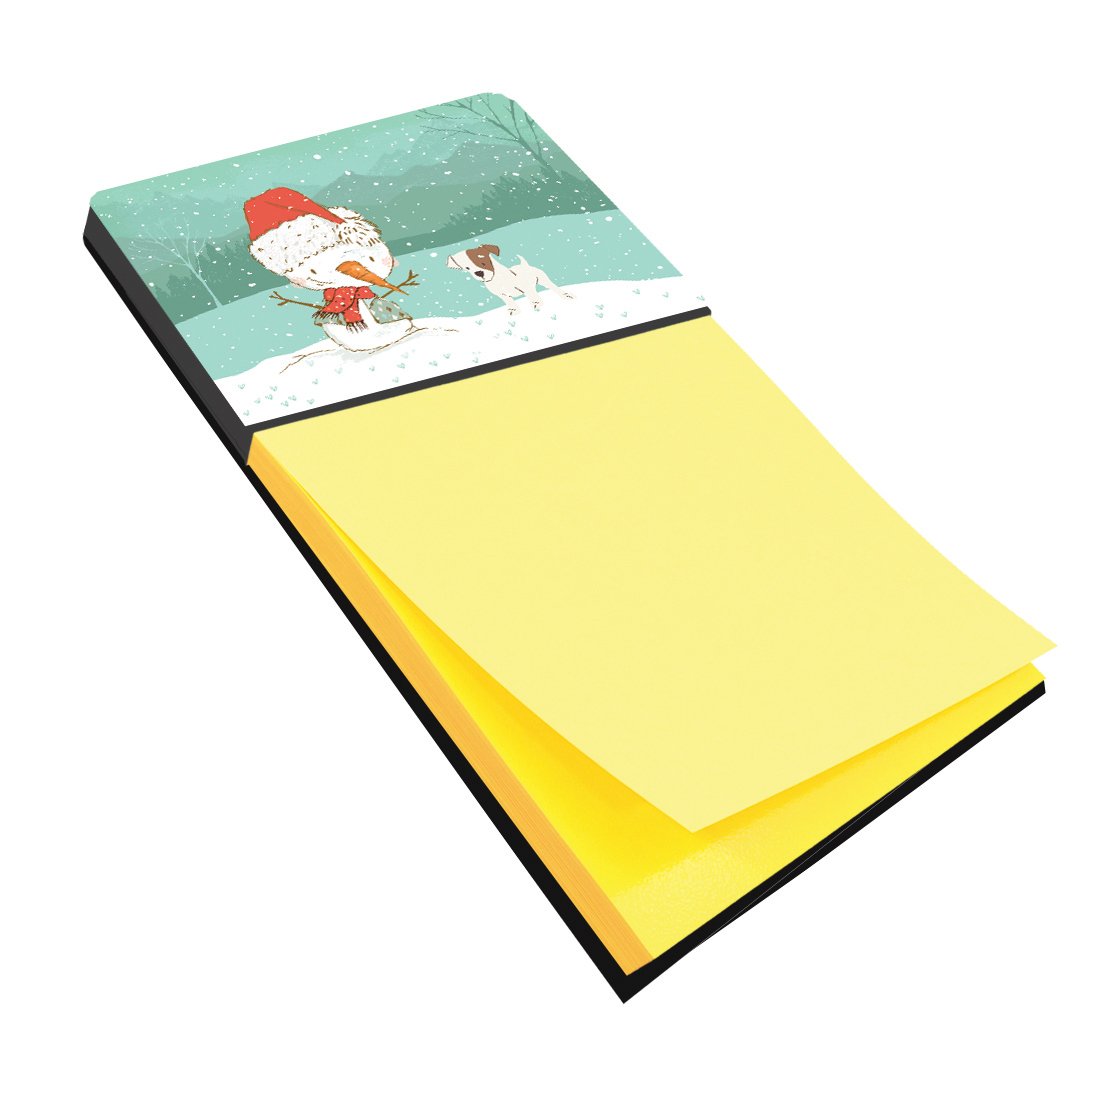 Jack Russell Terrier Snowman Christmas Sticky Note Holder CK2090SN by Caroline's Treasures